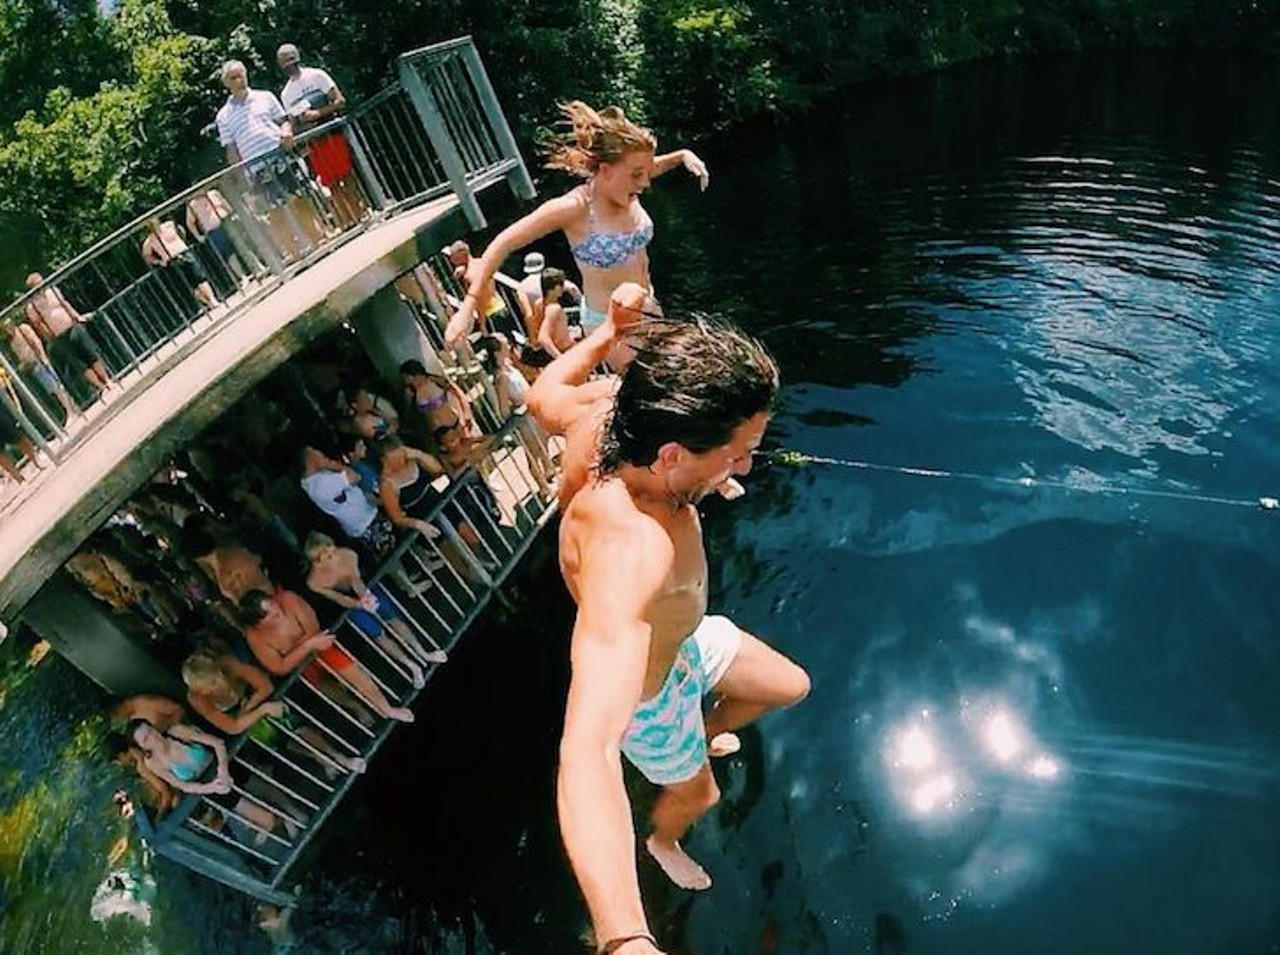 Wakulla Springs
465 Wakulla Park Drive, Wakulla Springs
4 hours away
One of the largest and deepest freshwater springs in the world, Wakulla is a scenic spot that&#146;s popular for weddings, so you might spot a bride and groom on their happy day from the spring&#146;s two-story observation and diving platform. 
Photo via dustinthewind40/Instagram